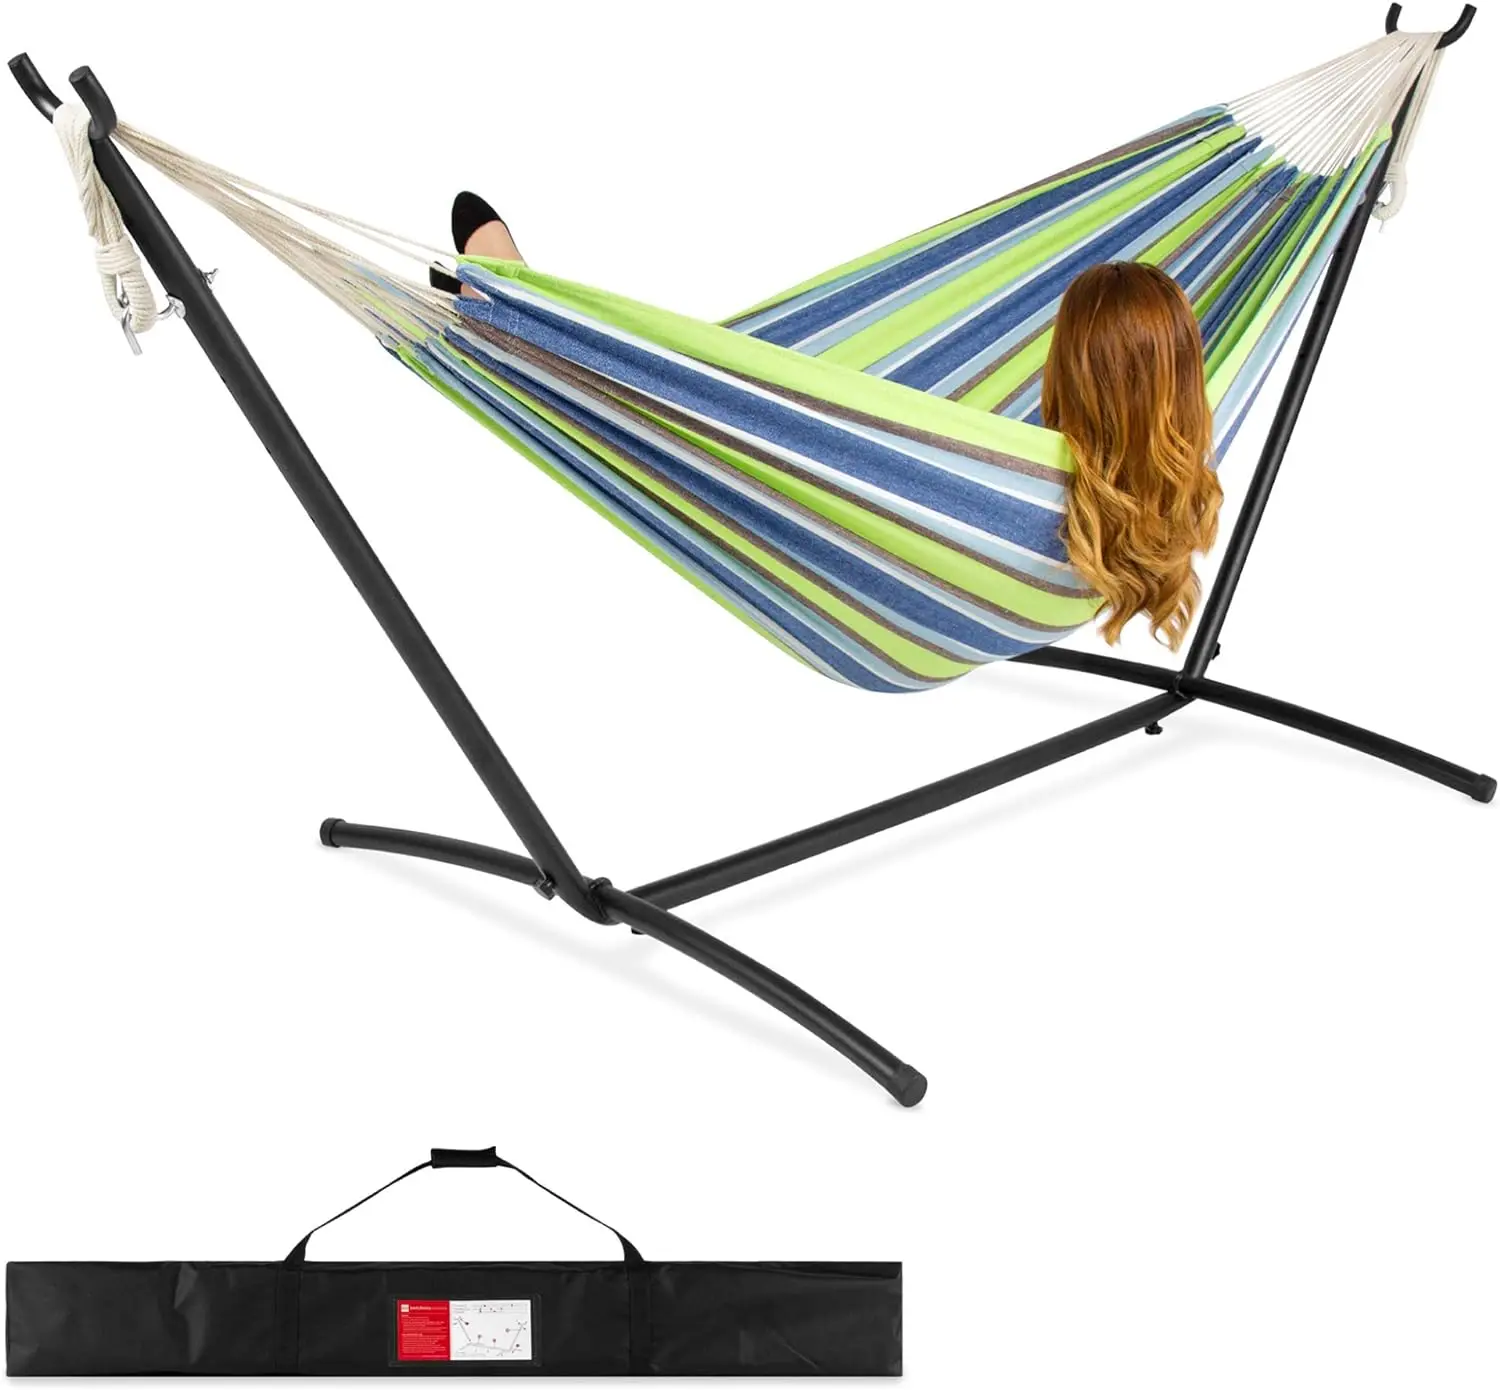 

Double Hammock with Steel Stand, Indoor Outdoor Brazilian-Style Cotton Bed w/Carrying Bag, 2-Person Capacity - Blue/Green